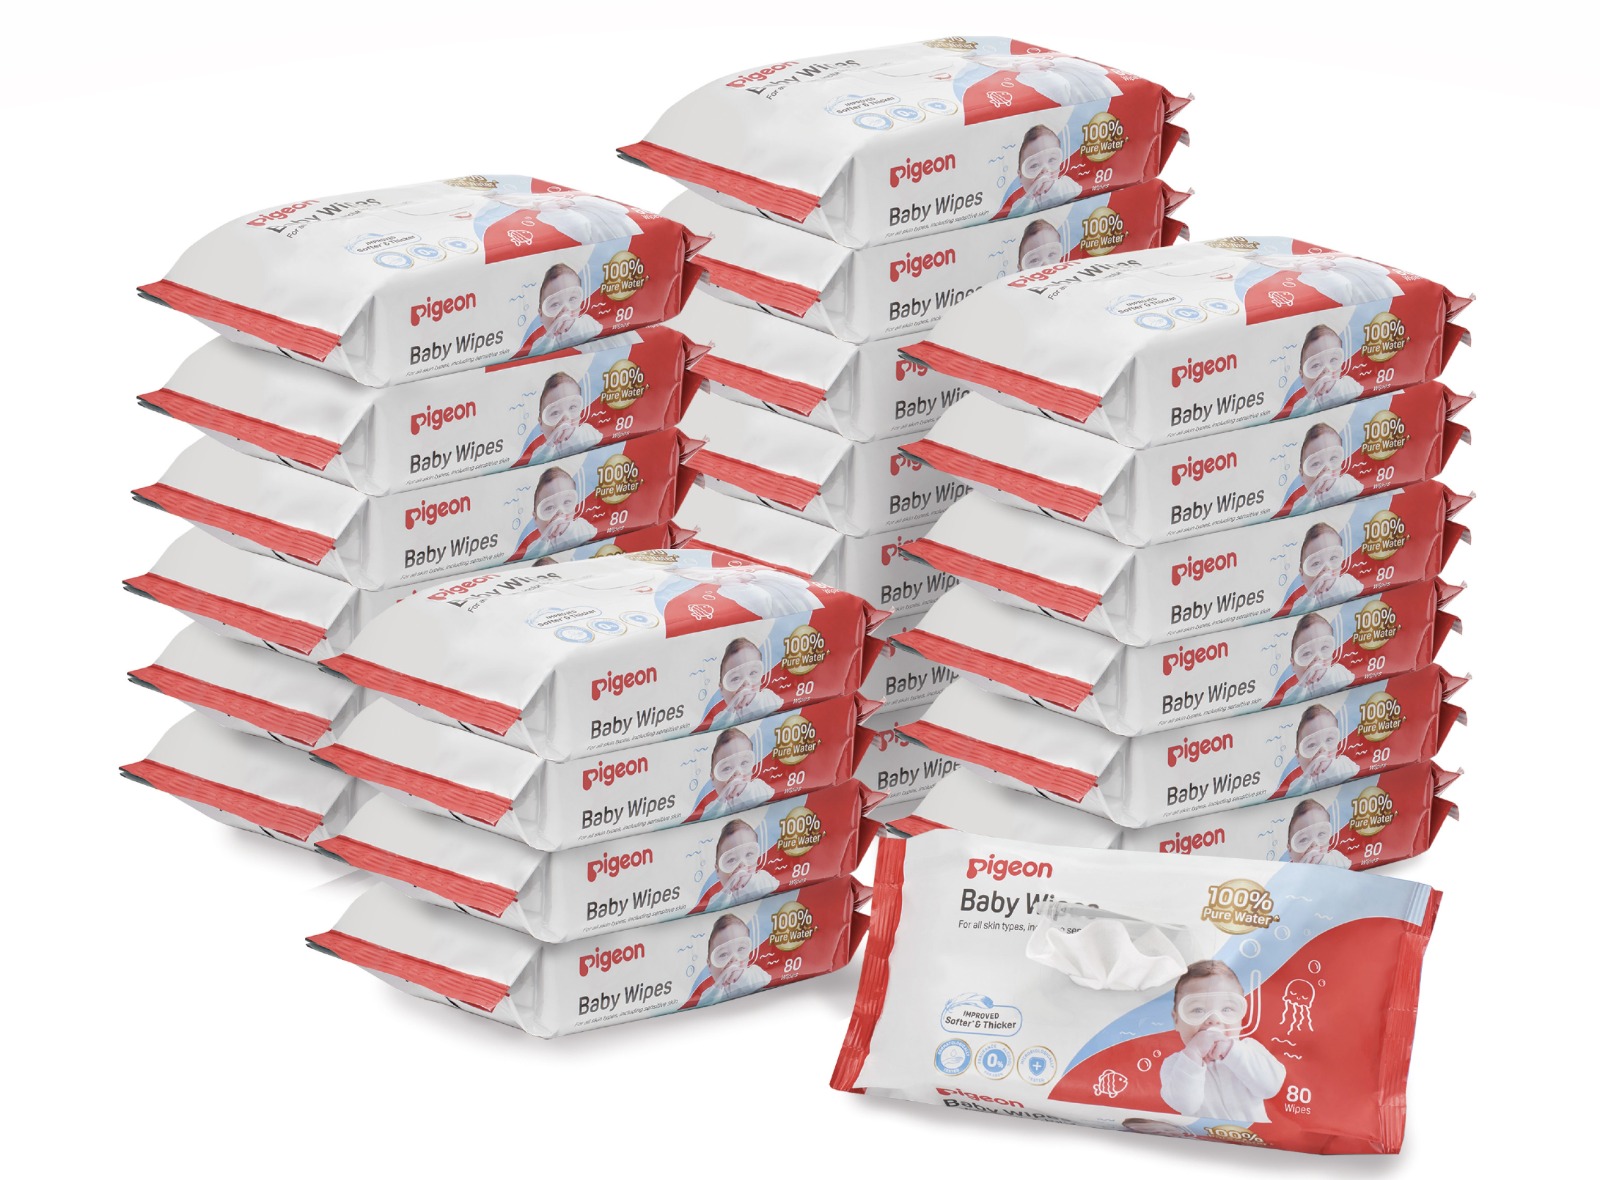 Pigeon Baby Wipes 80 Sheets 100% Pure Water Carton (PG-79498SC)